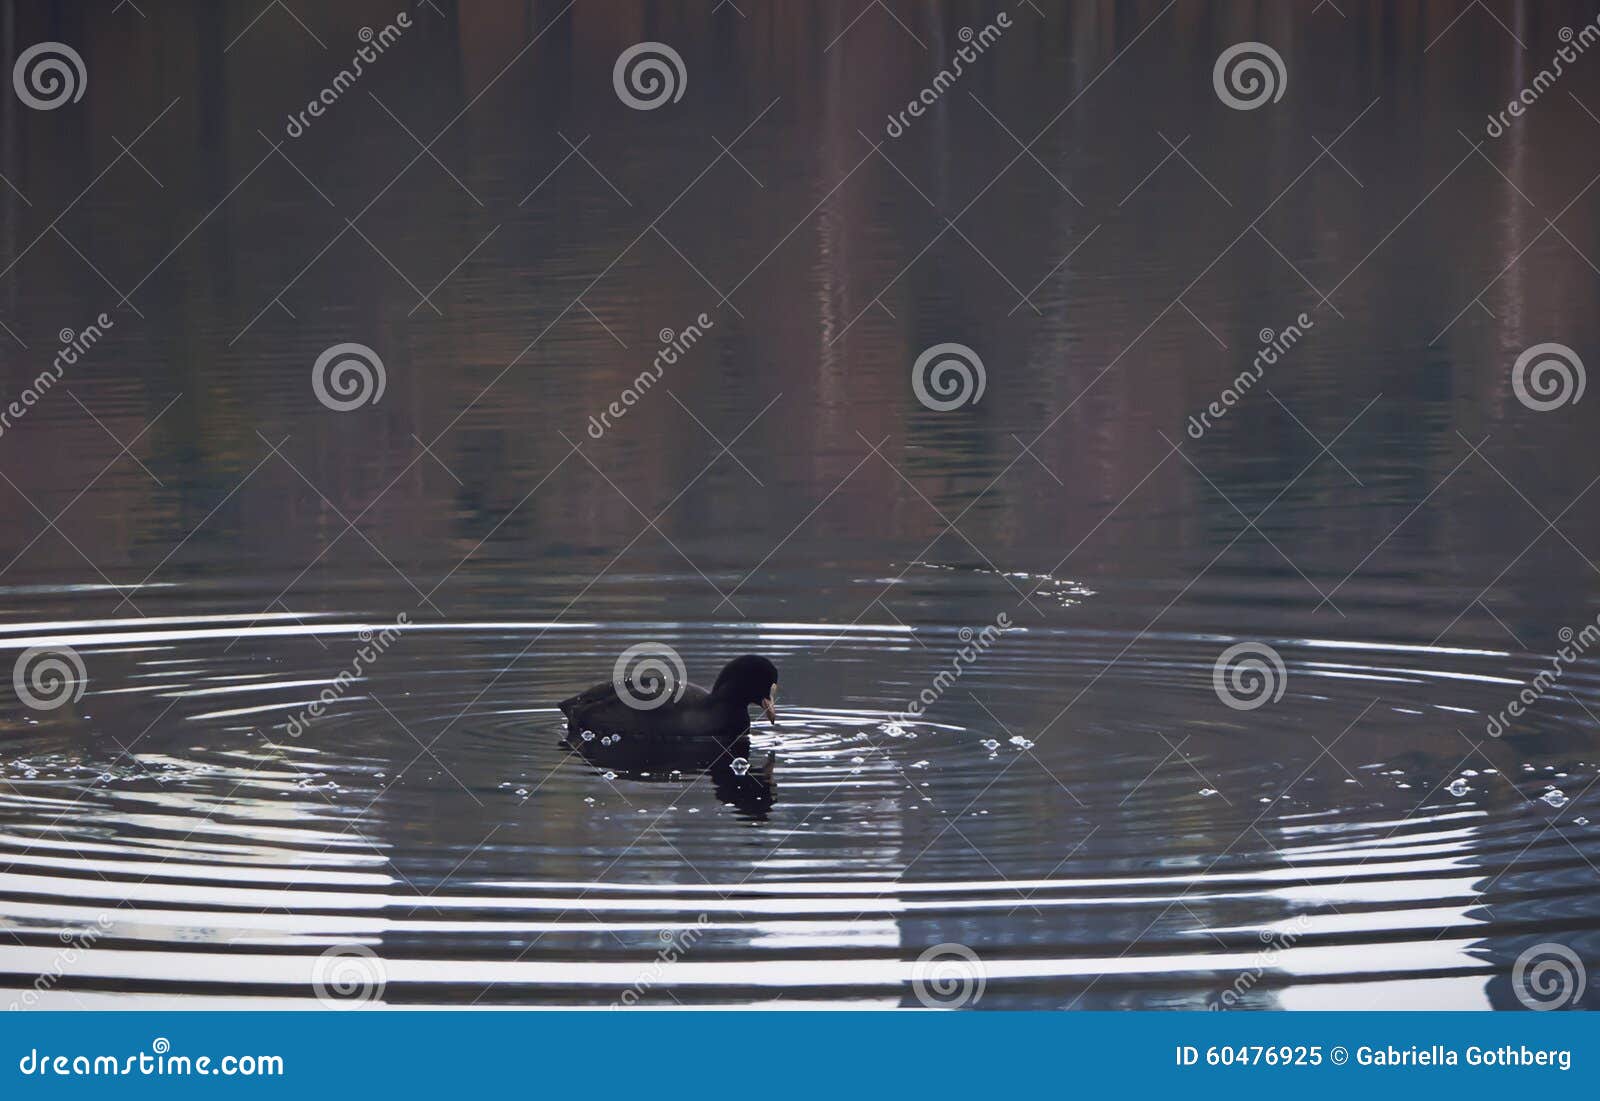 eurasian coot centered in rings on water on a calm lake.